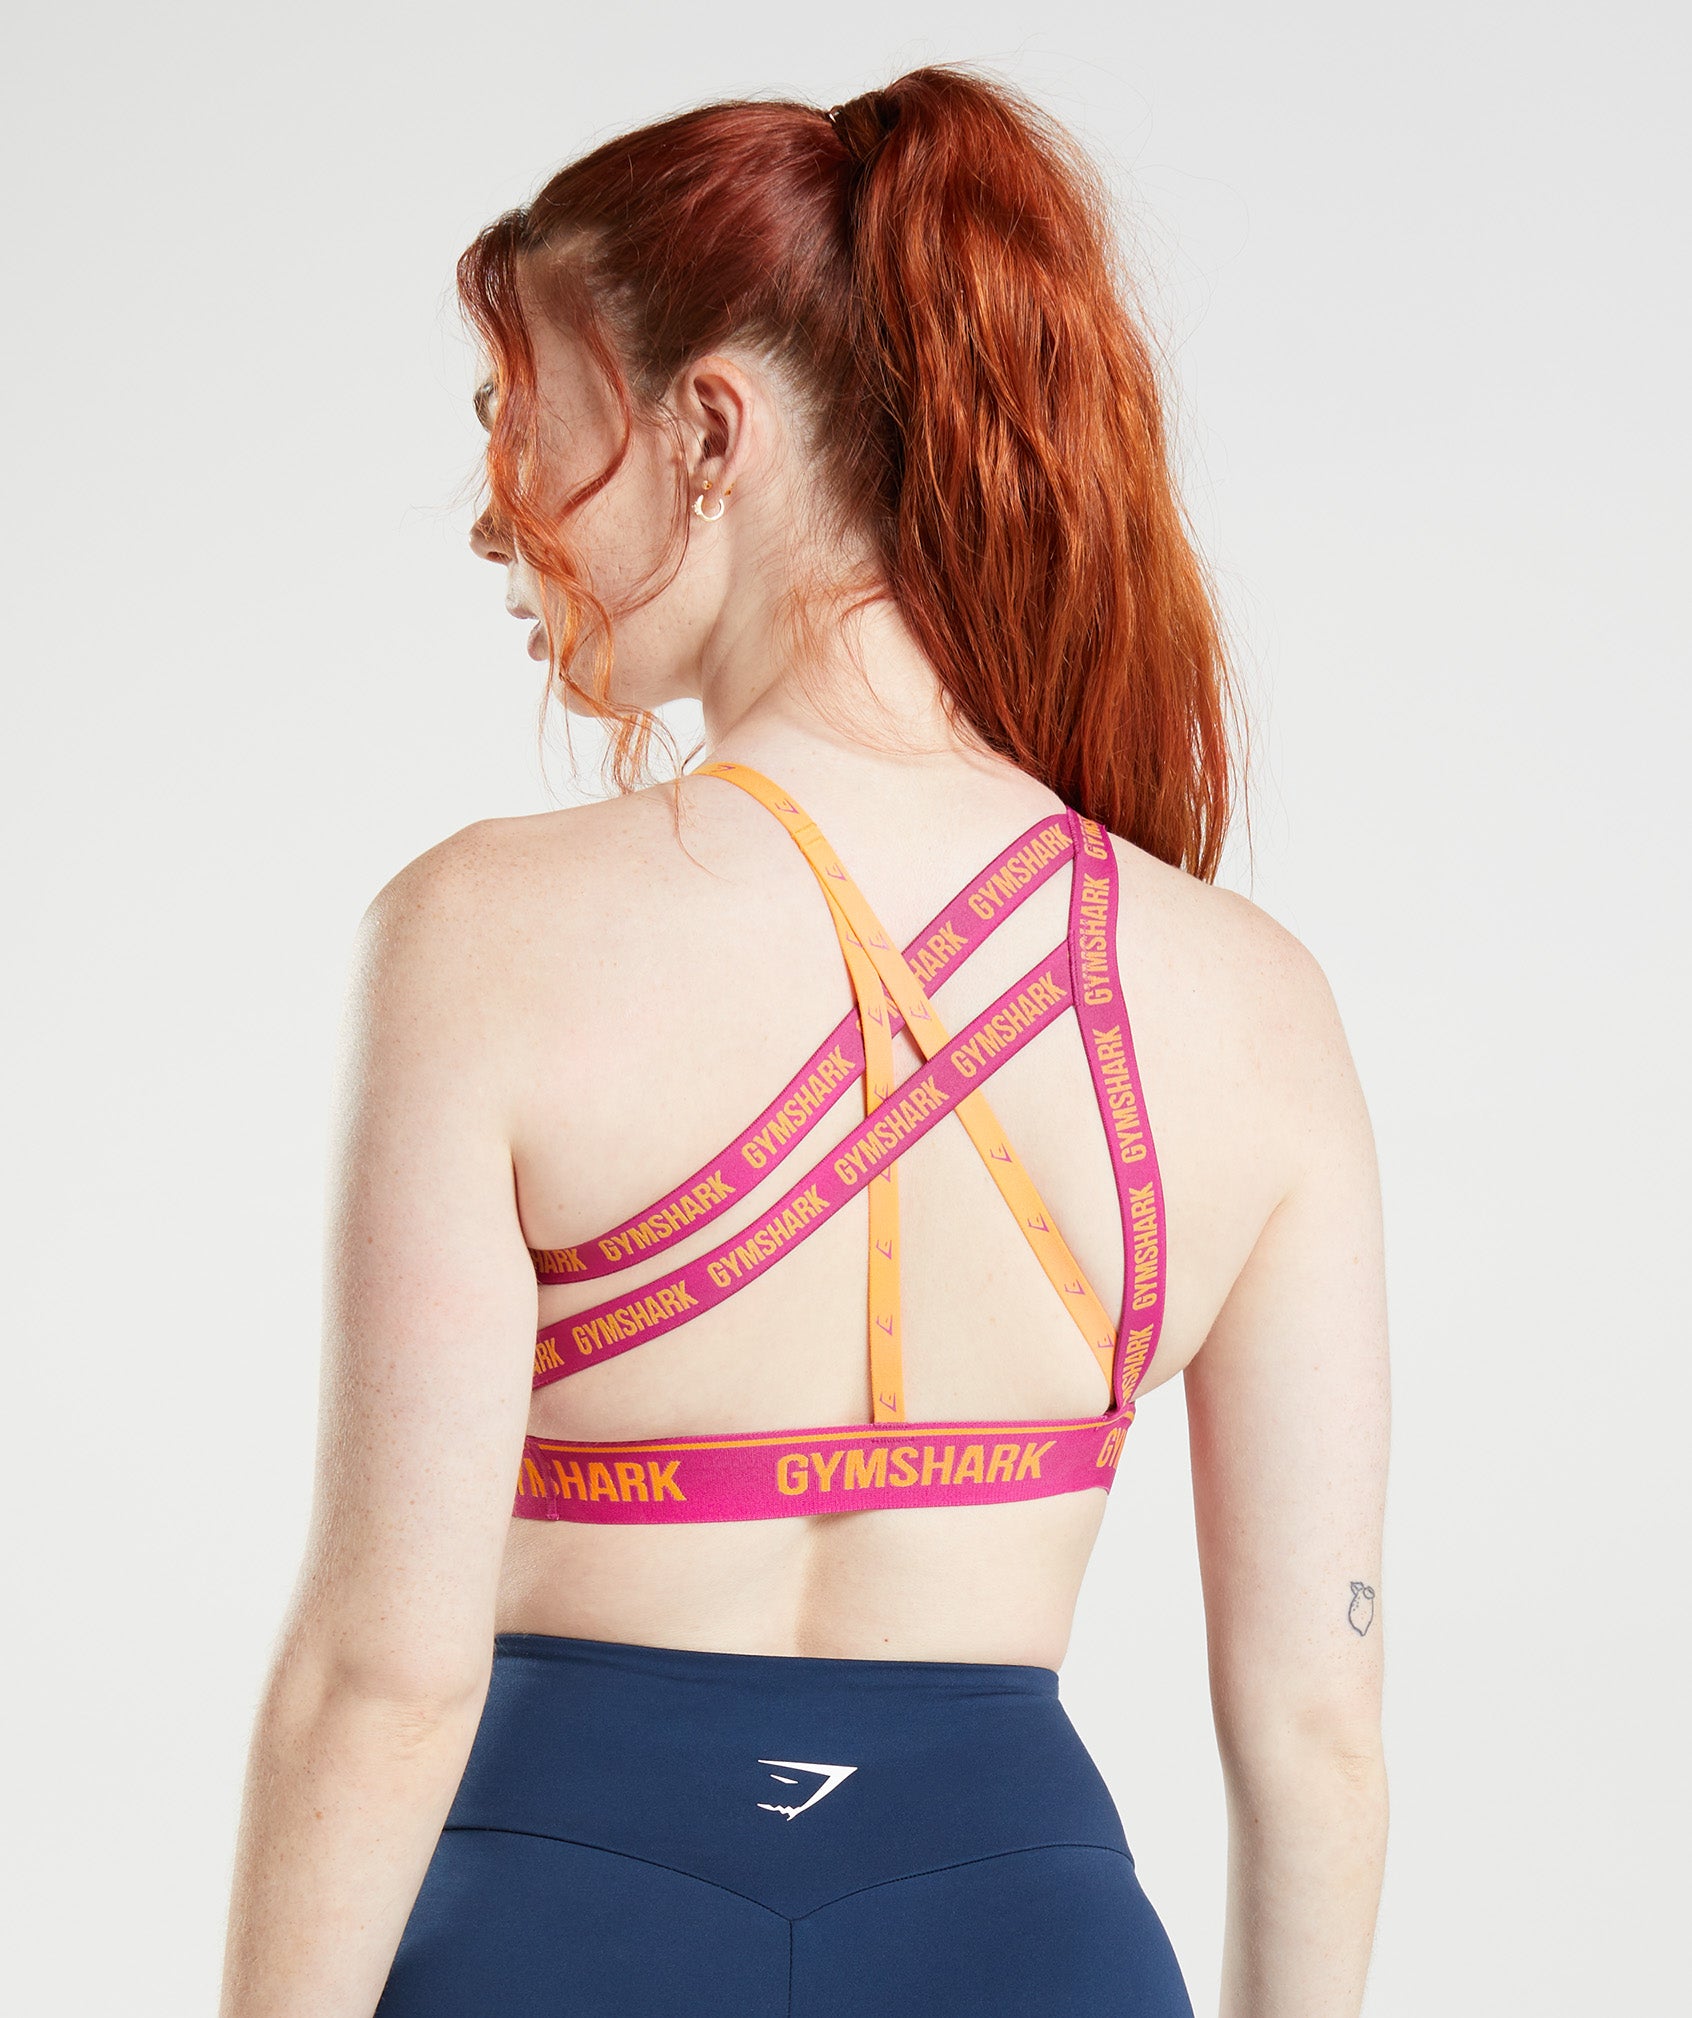 Gymshark Ruched Sports Bra Pink - $24 (20% Off Retail) - From Audrey